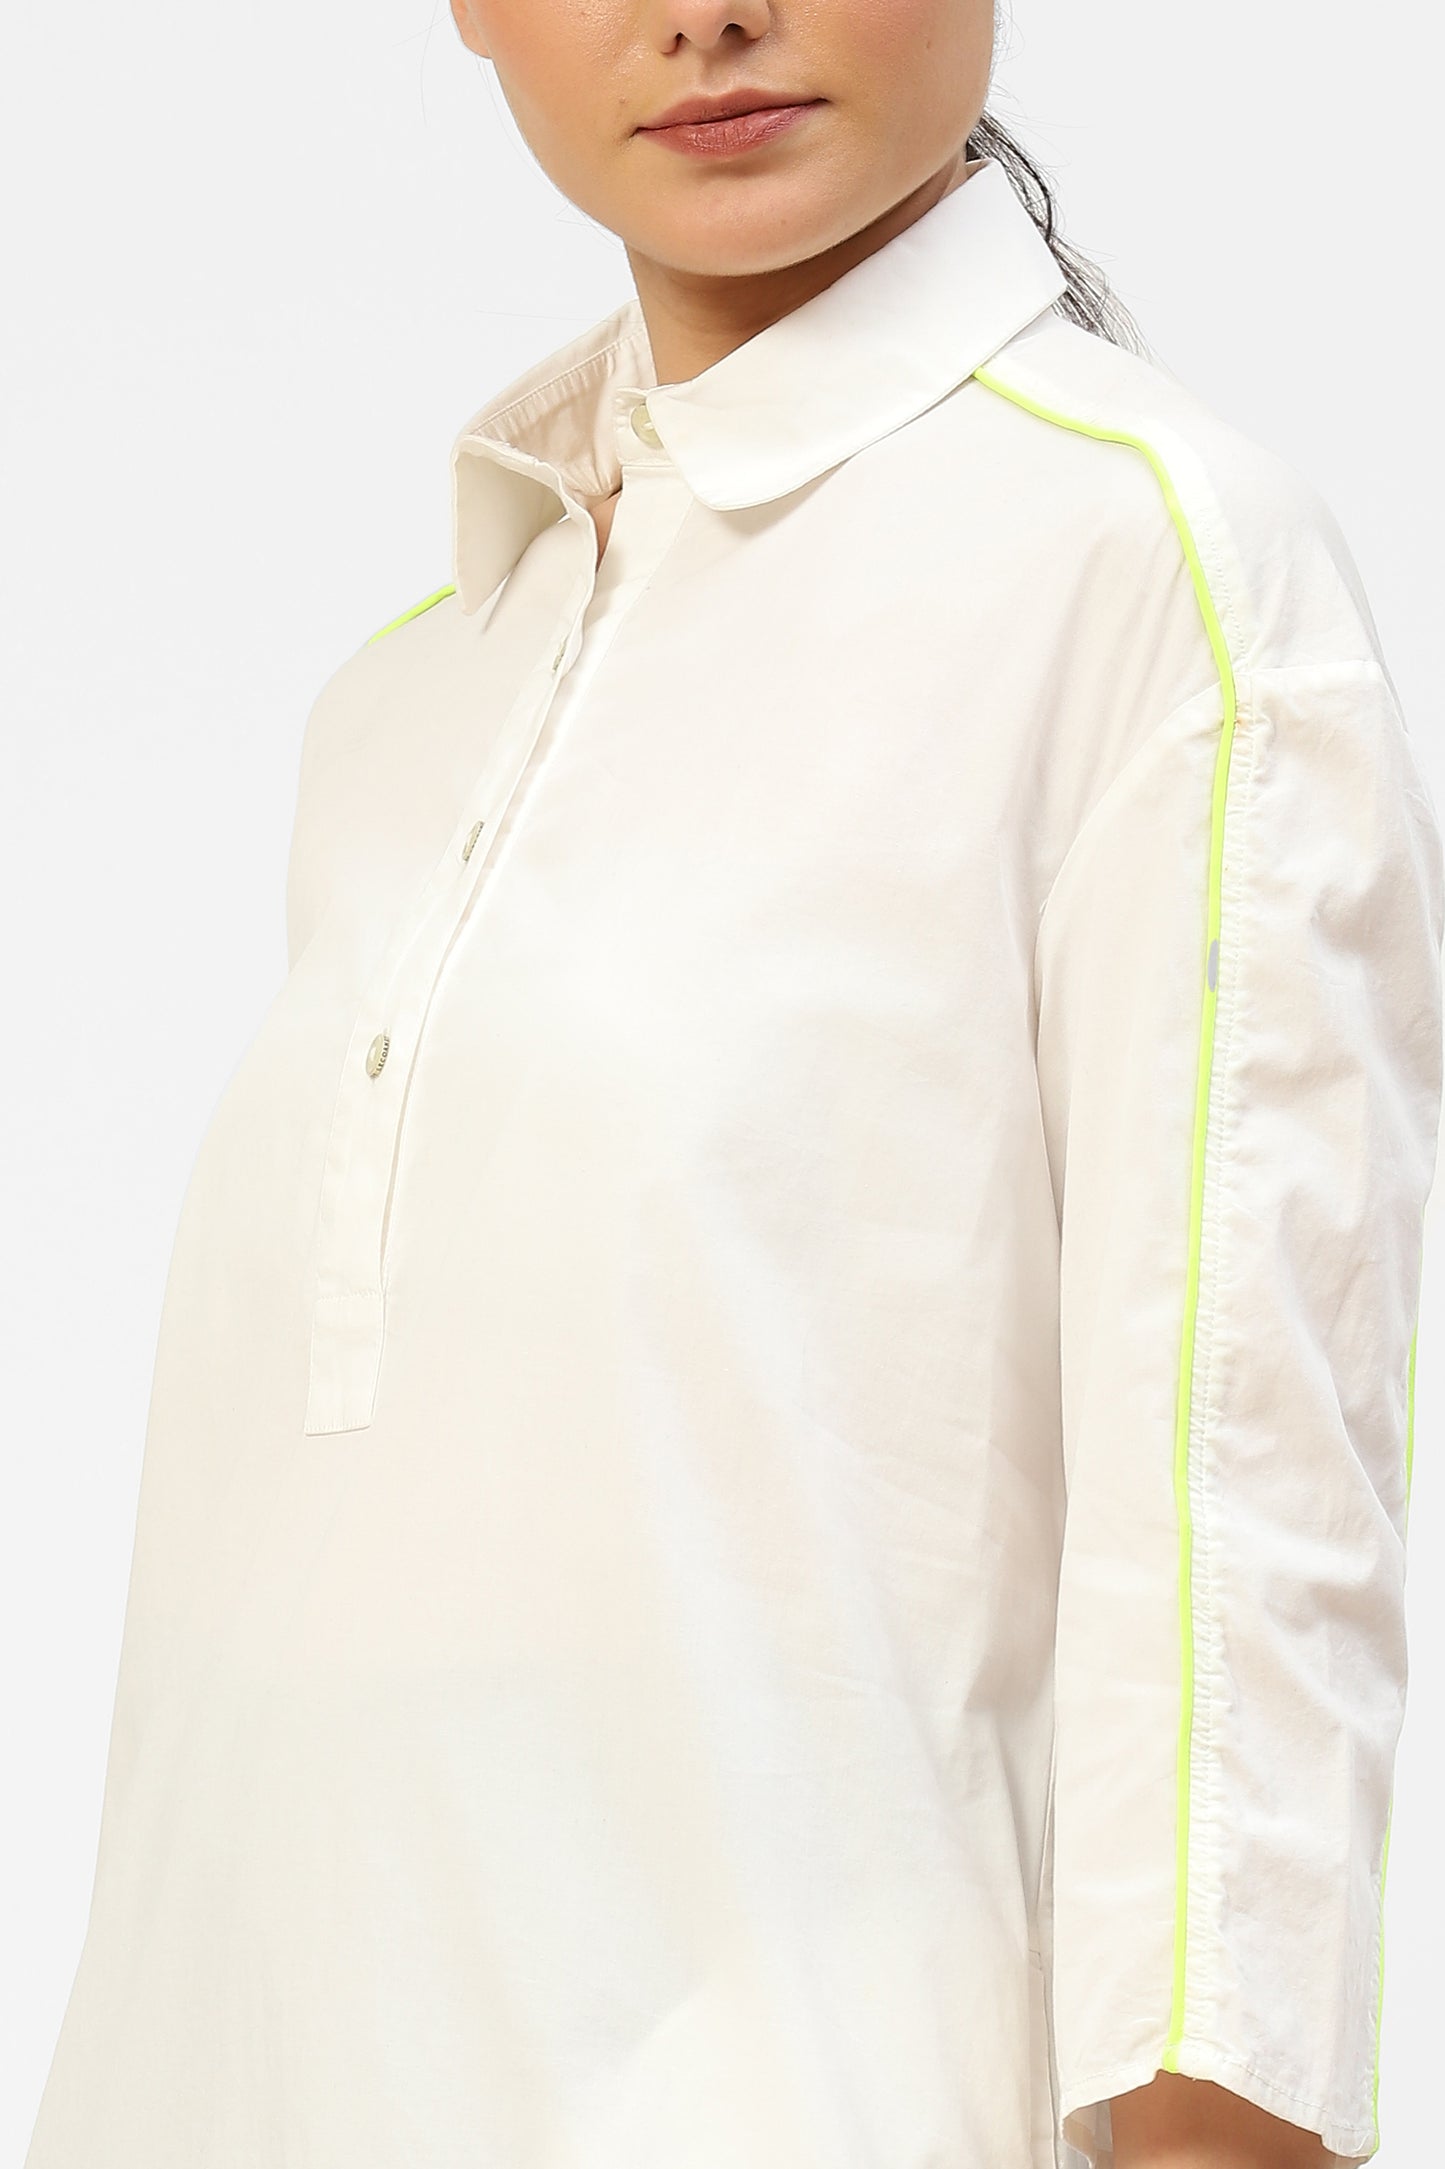 White Poplin Kurta For Women With Lime Green Piping Shoulder Detail